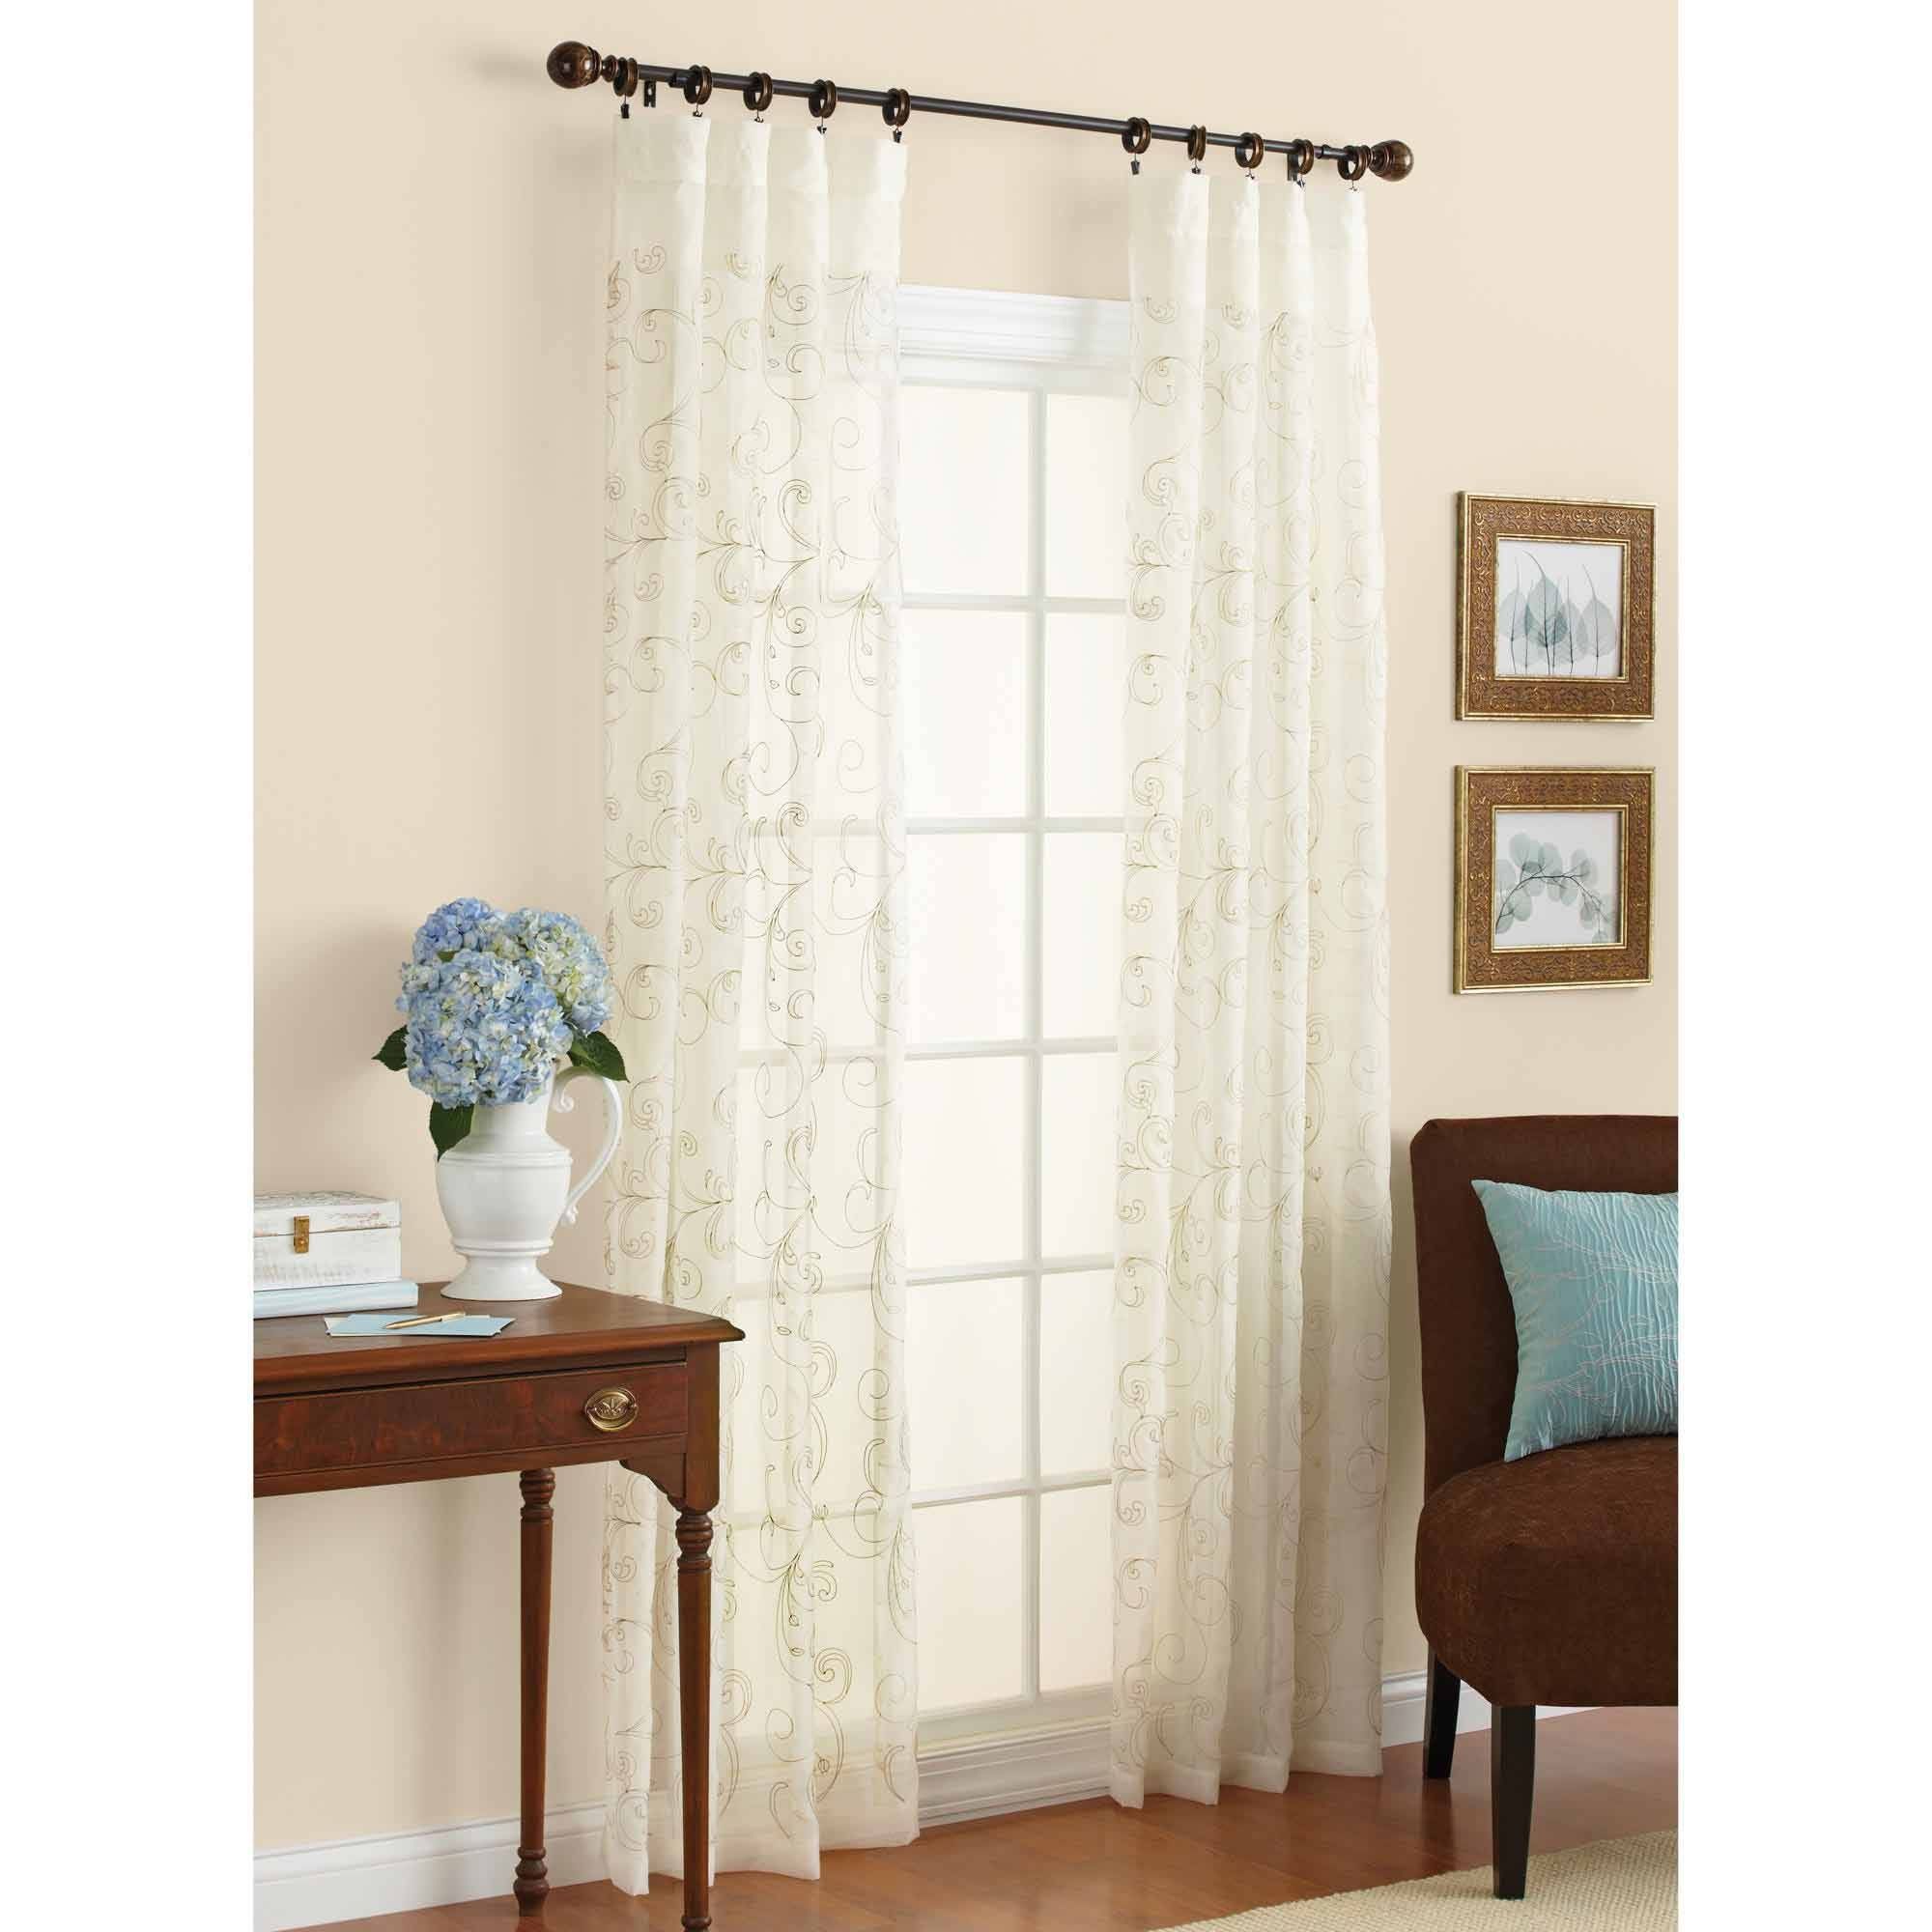 Better Homes And Gardens Embroidered Sheer Curtain Panel Walmart With Regard To Curtains Sheers (View 16 of 25)